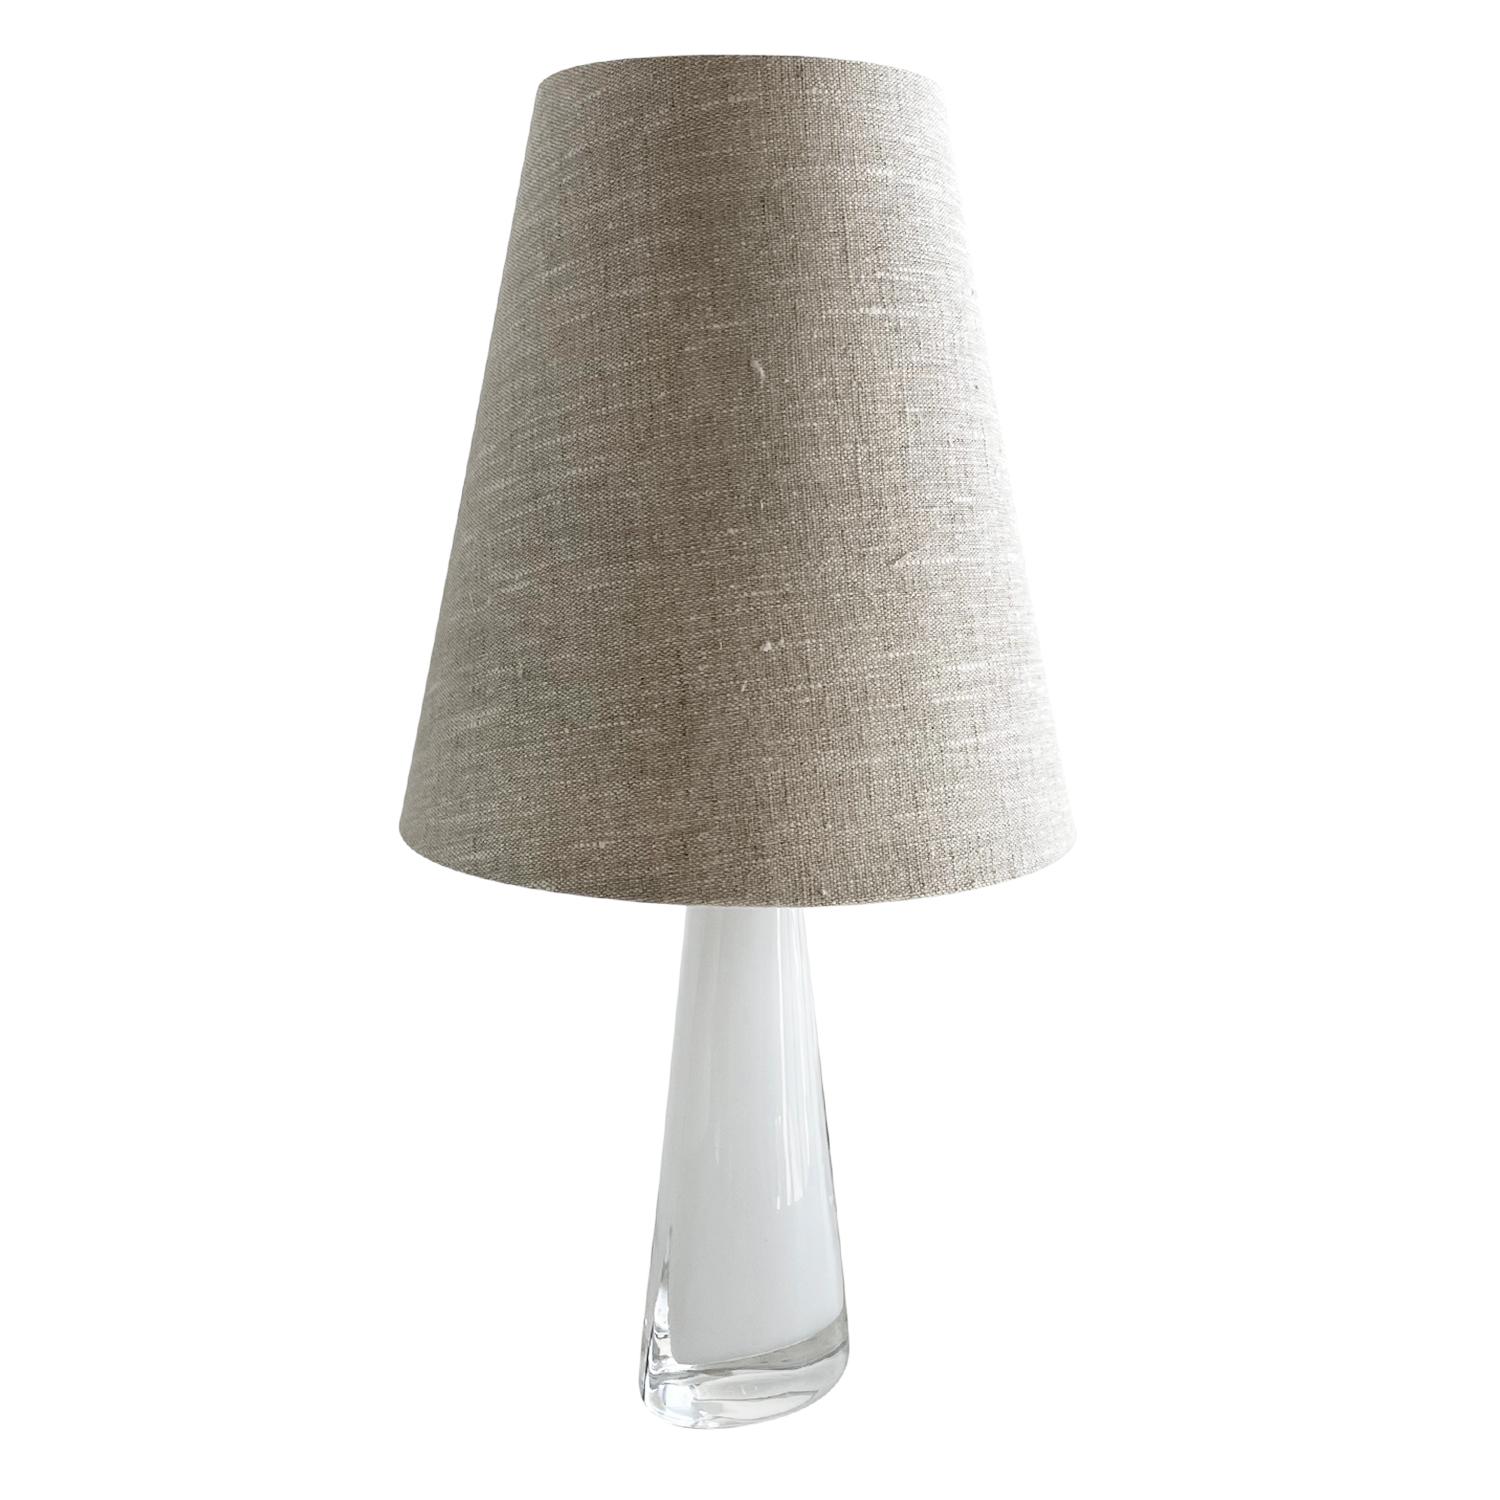 A small, vintage Mid-Century Modern Swedish table lamp made of hand blown smoked Orrefors glass, the beam is enhanced with a chrome ring, composed with a new light-grey shade, featuring a one light socket in good condition. The Scandinavian desk